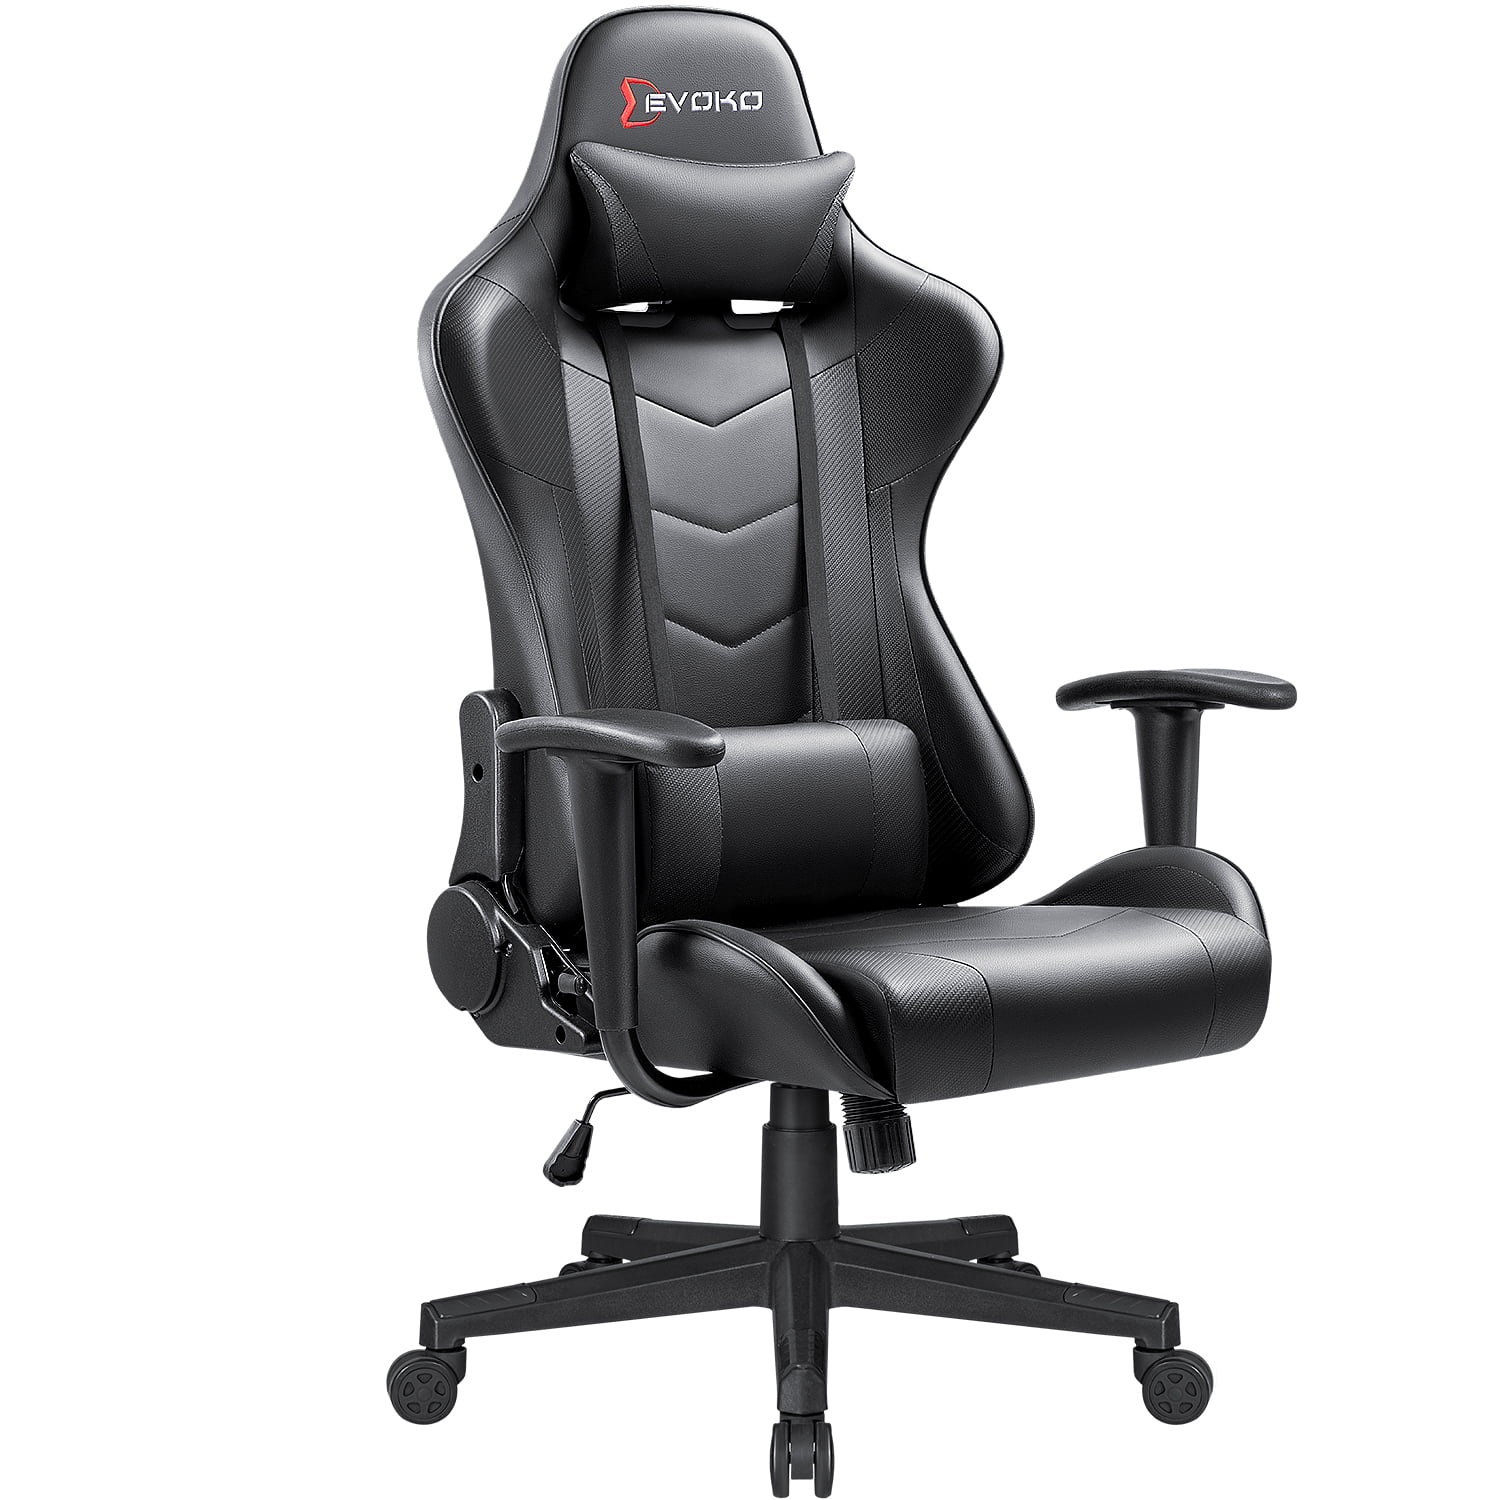 Furniwell Gaming Chair Racing Computer Chair PC Office Desk Chair Adjustable Swivel High Back Carbon Fiber Style PU Leather Executive Ergonomic Chair with Headrest and Lumbar Support Red/Black 